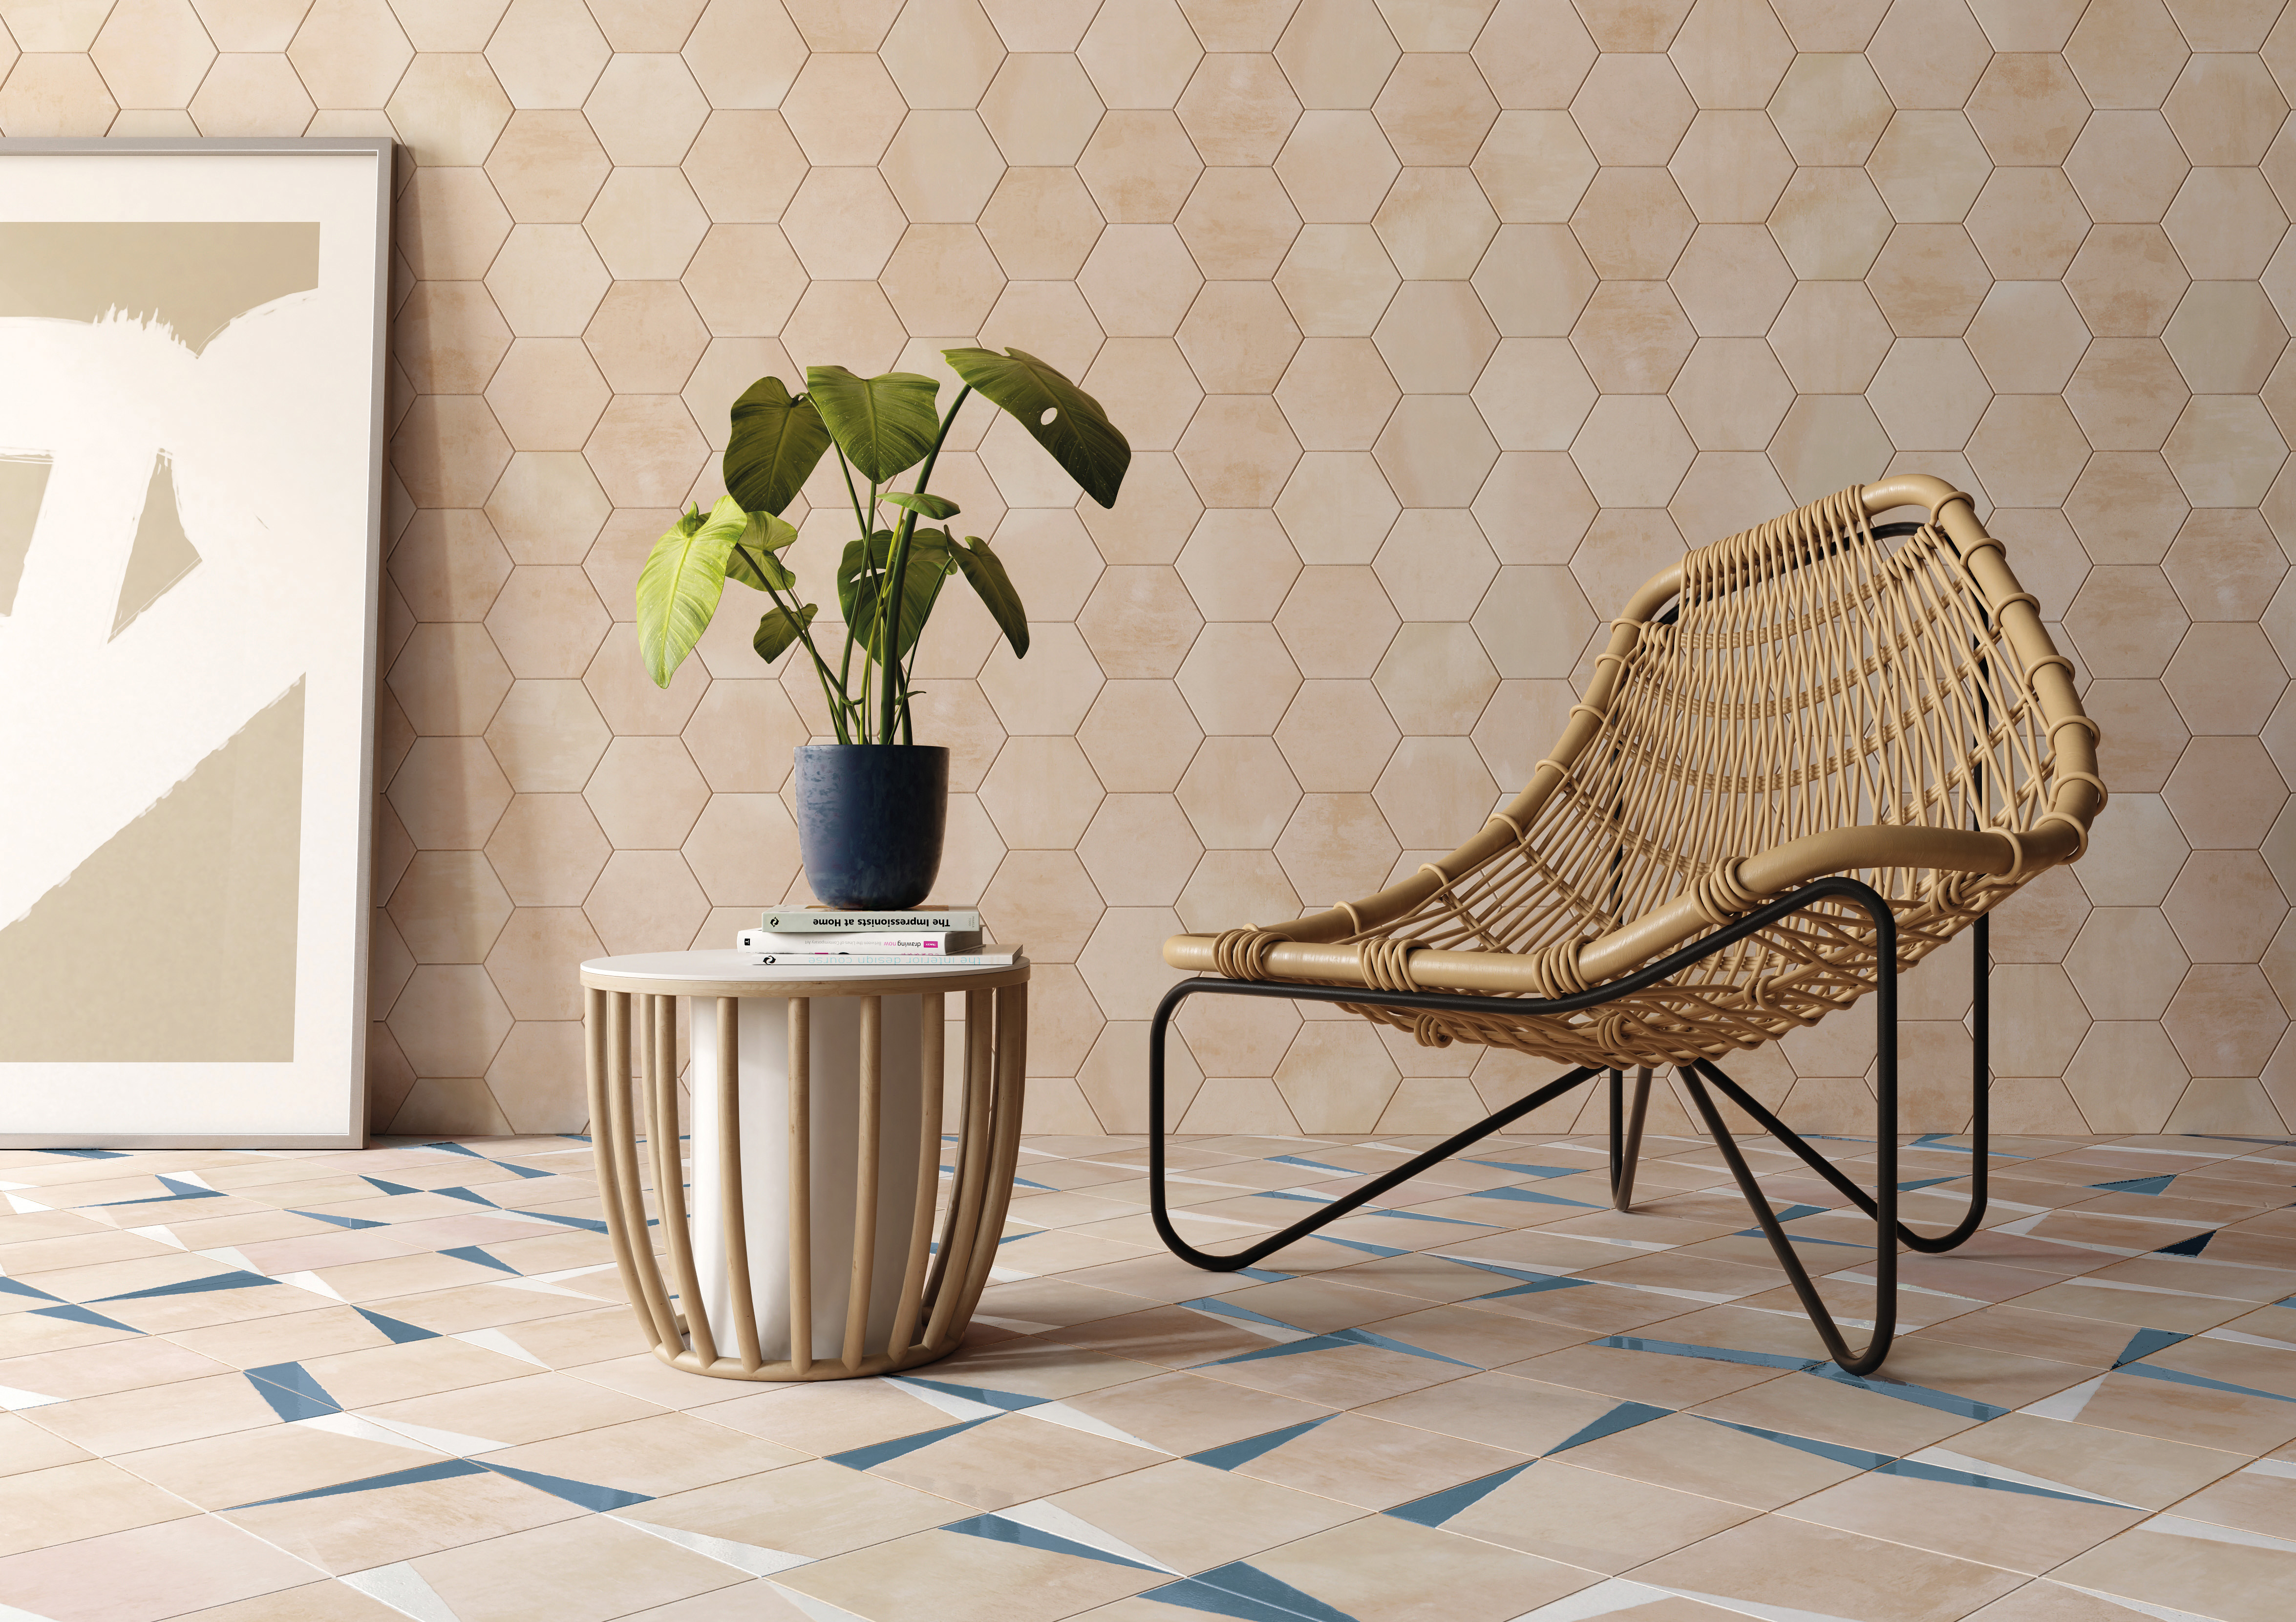 Wall tiles from Terra